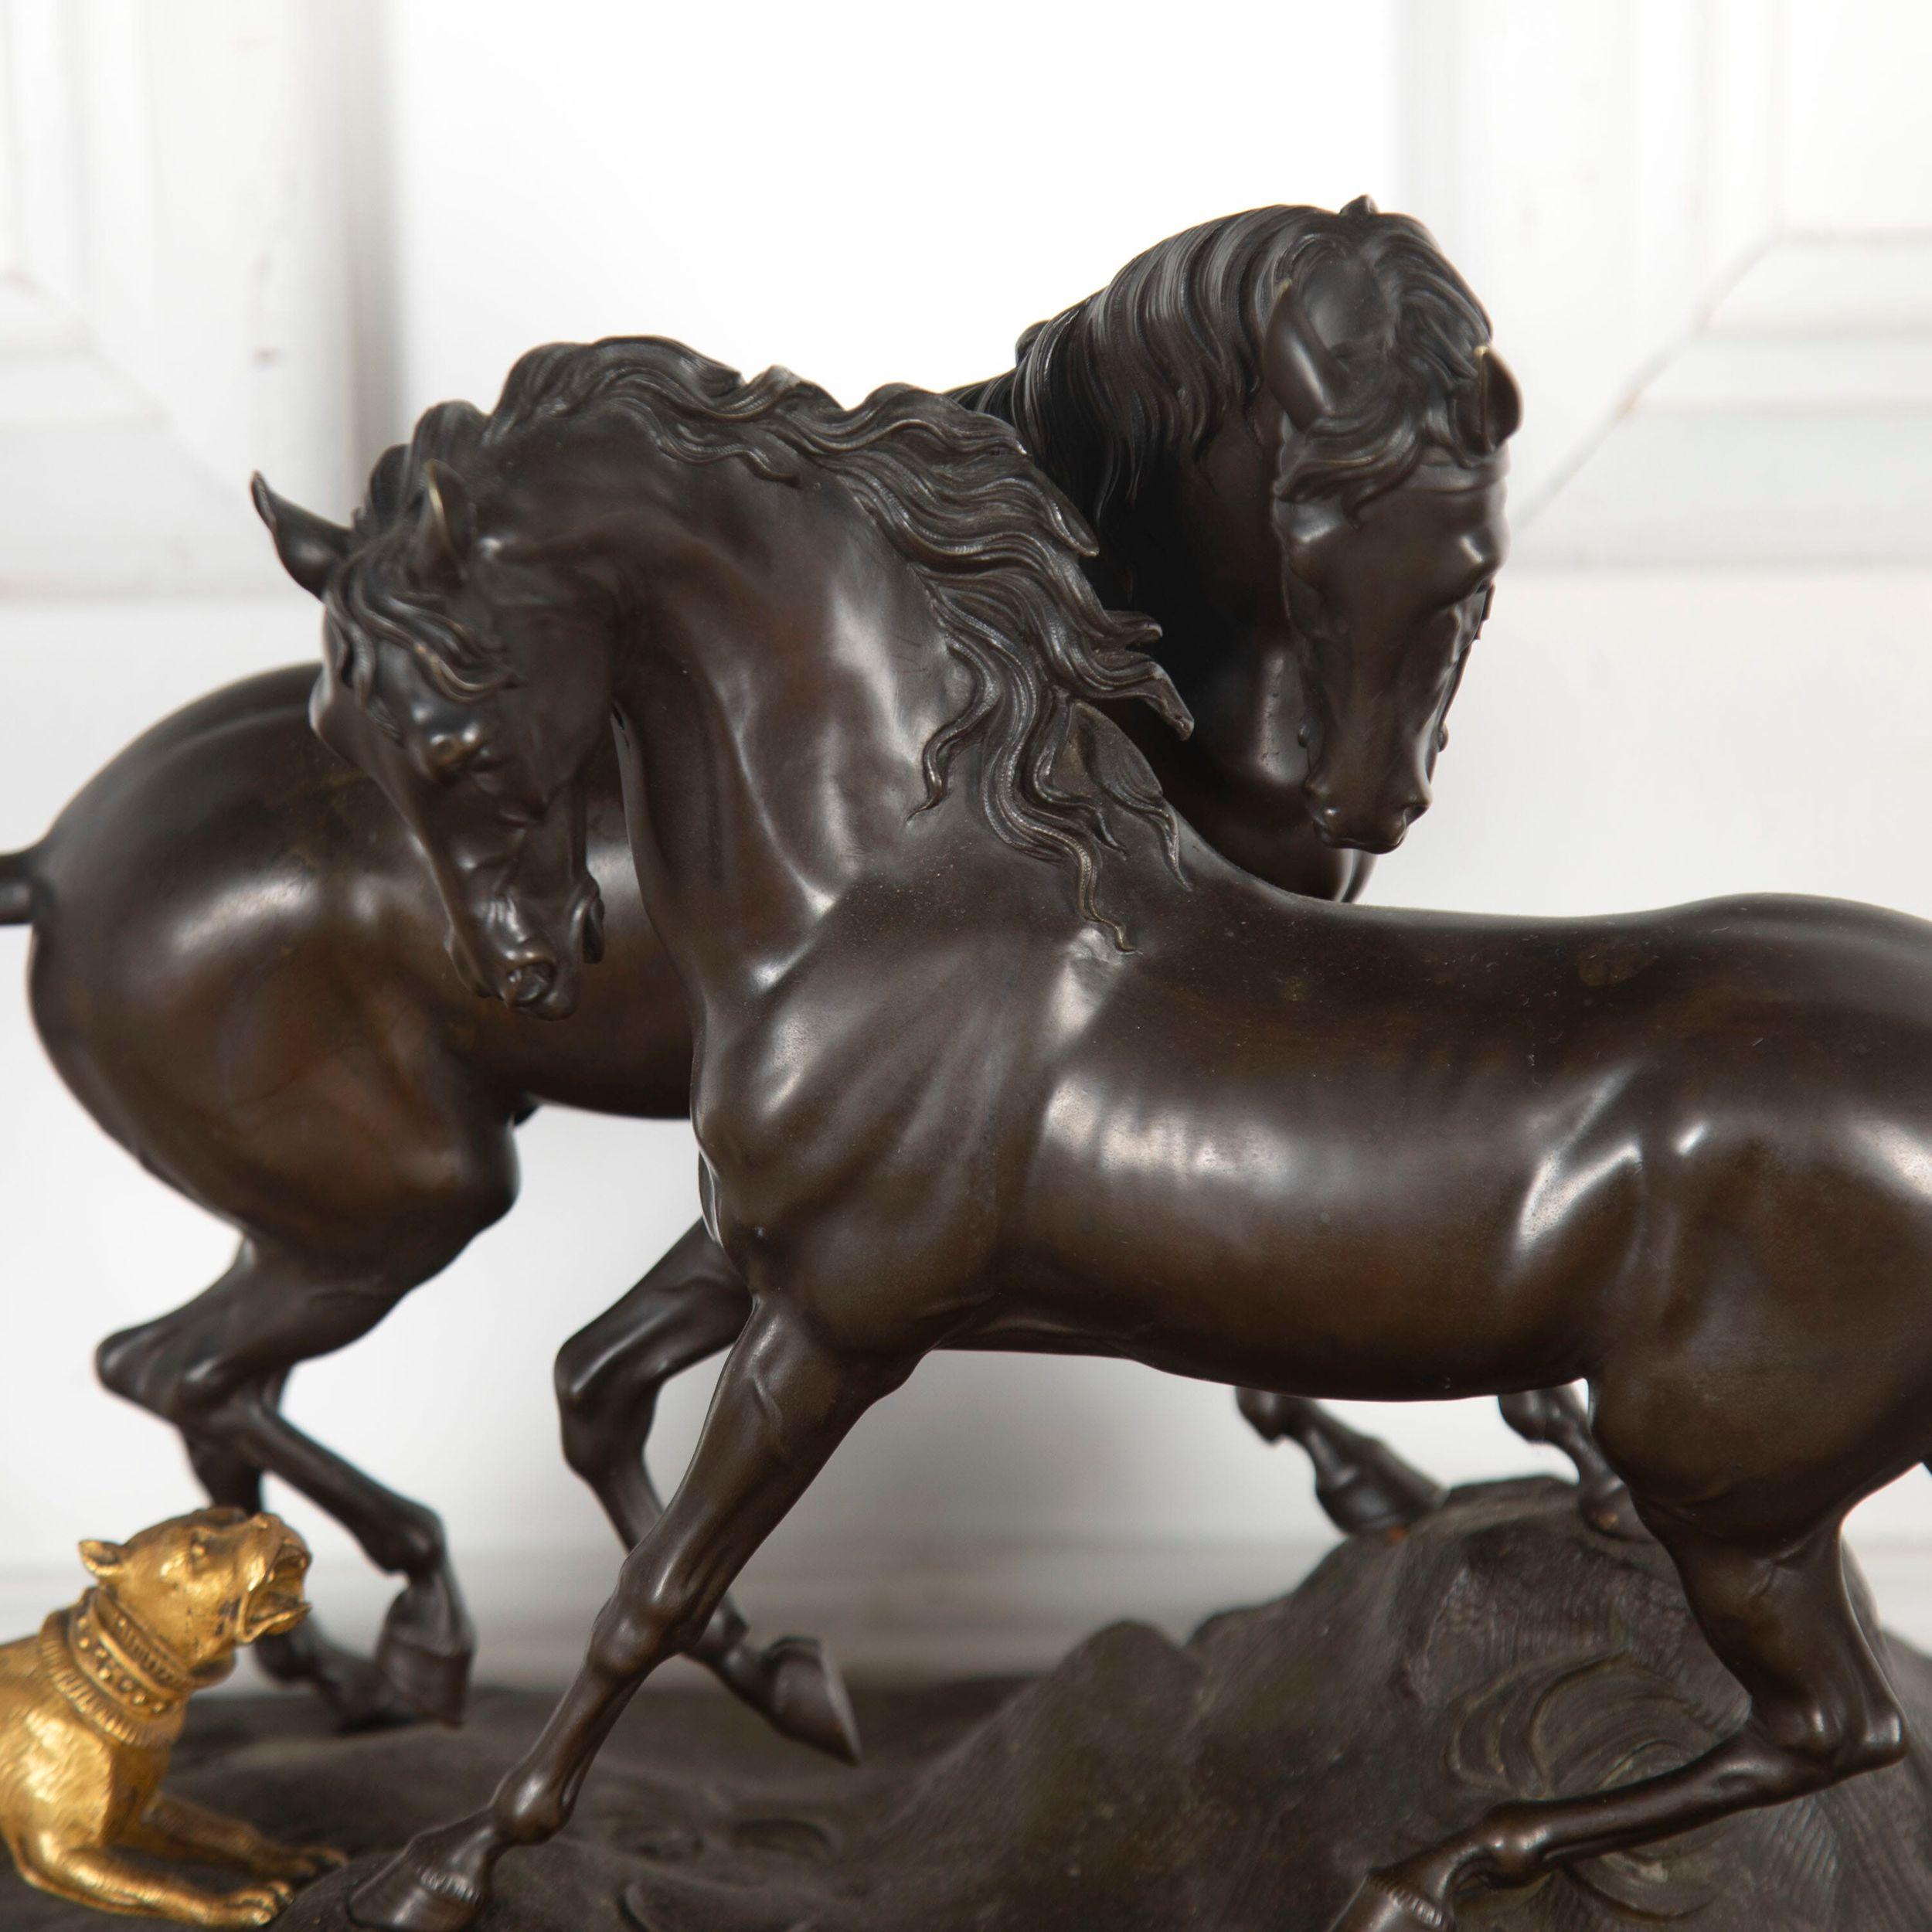 Superb 20th century quality bronze sculpture of two horses cautiously defending eachother with a gilt figure of a dog barking at them.

Finely cast after the original by Pierre Jules Mene, (sculptor), 1810 - 1879, entitled 'L'accolade'.

This